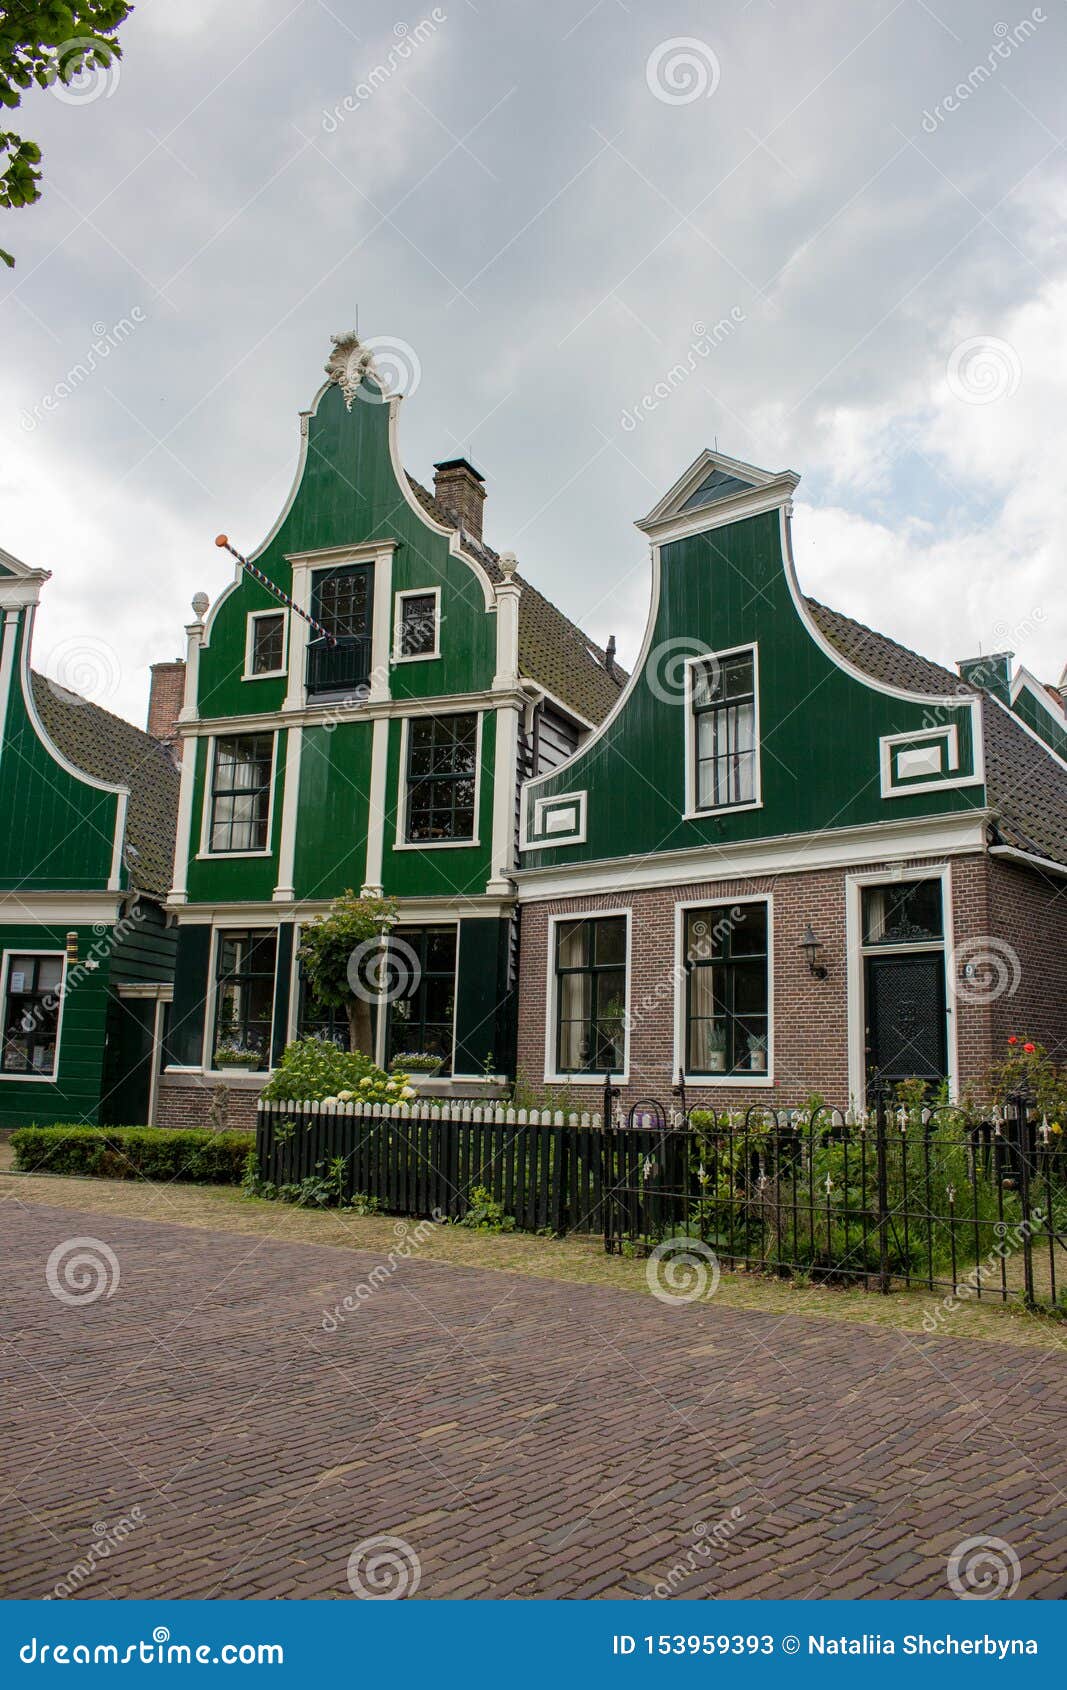 Facade Of Traditional Dutch Buildings In Village Old Brick And Wooden